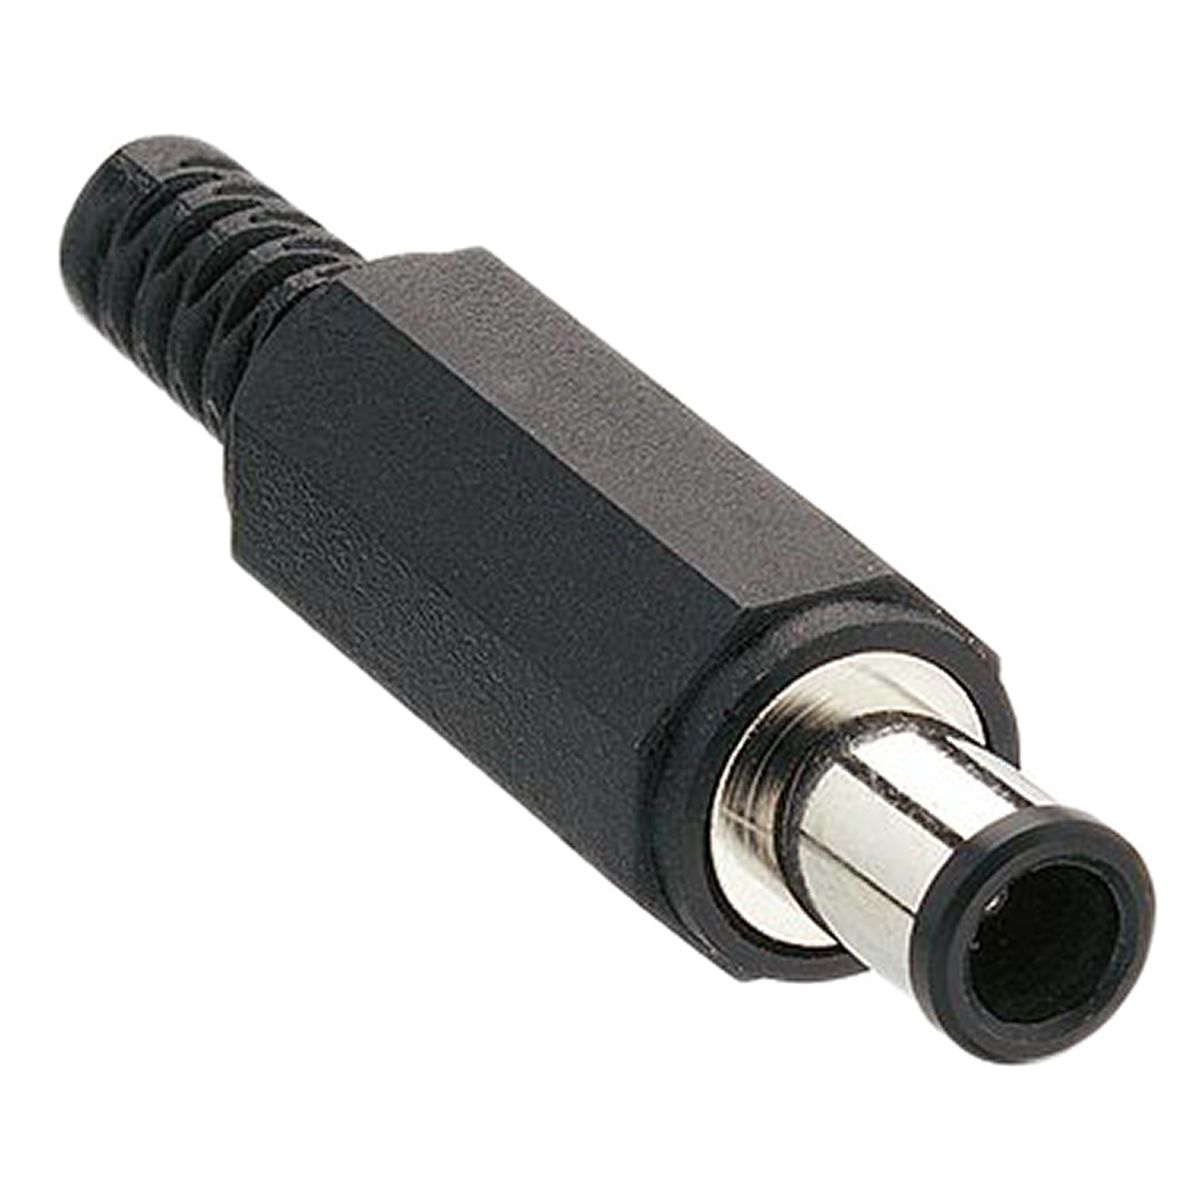 Lumberg DC Plug Rated At 2.0A, 24.0 V, Cable Mount, length 37.0mm, Nickel